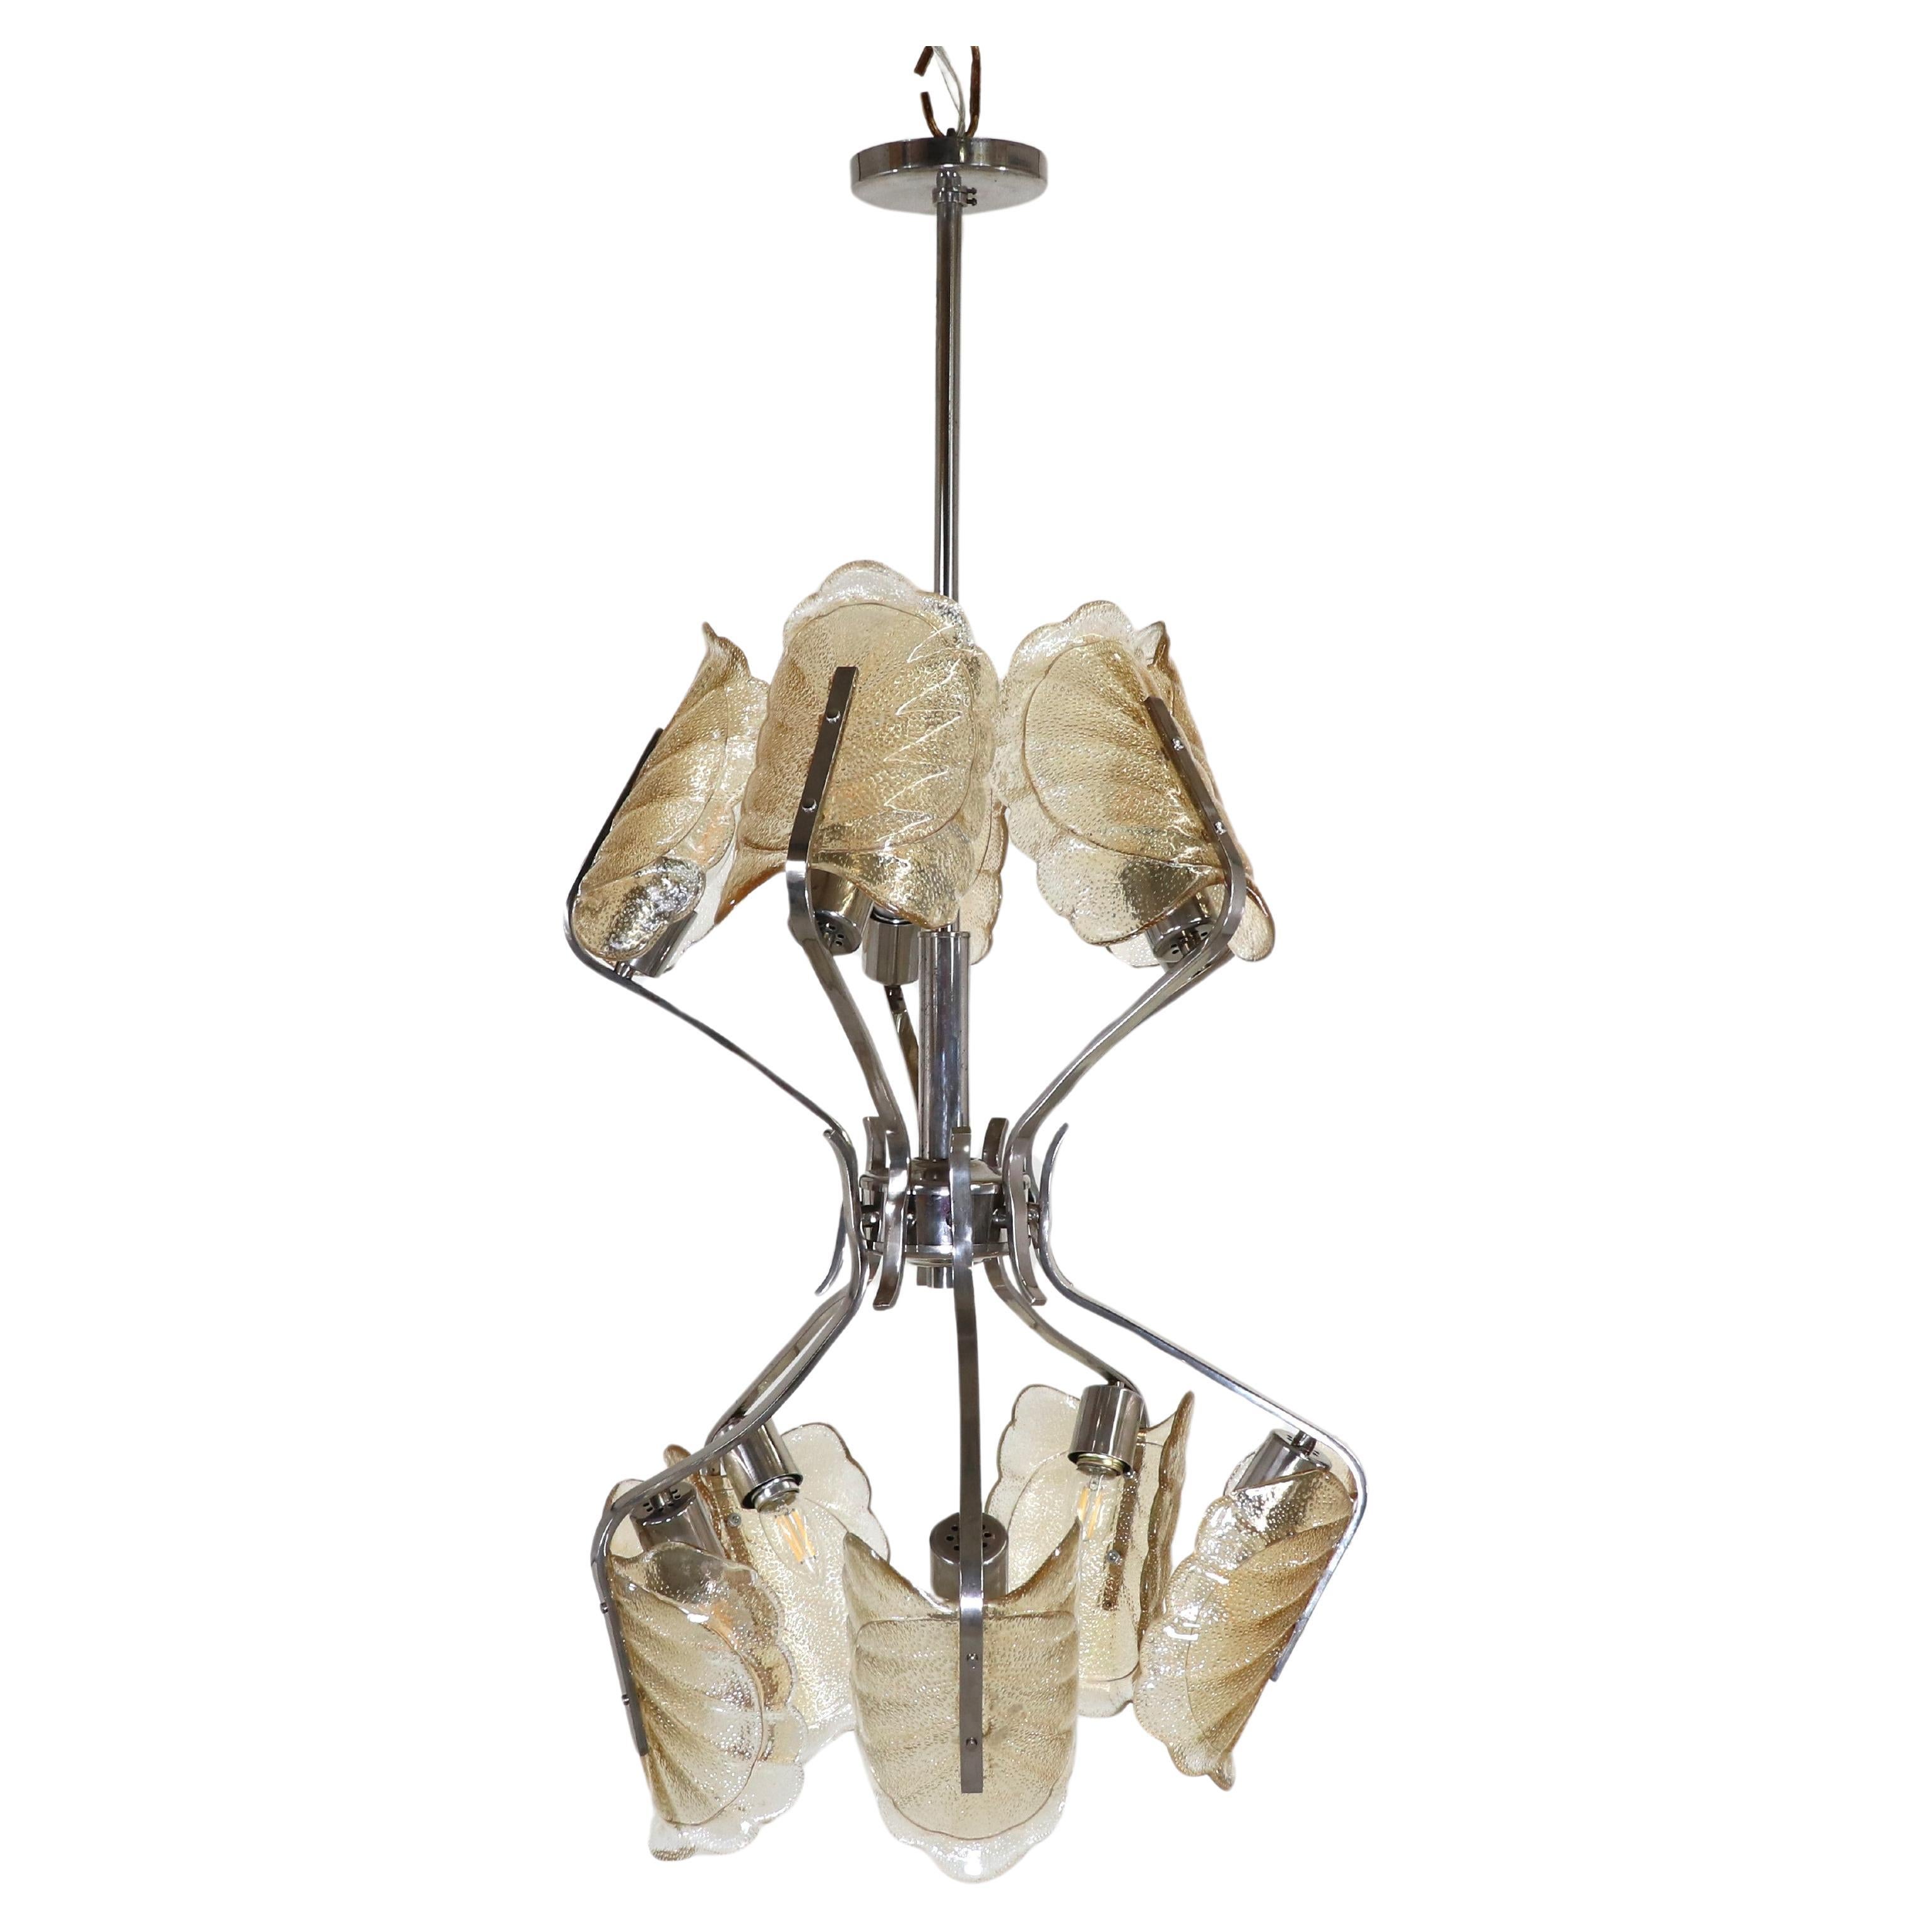 Vintage Italian Fixture with Textured Glass and Amber Accents